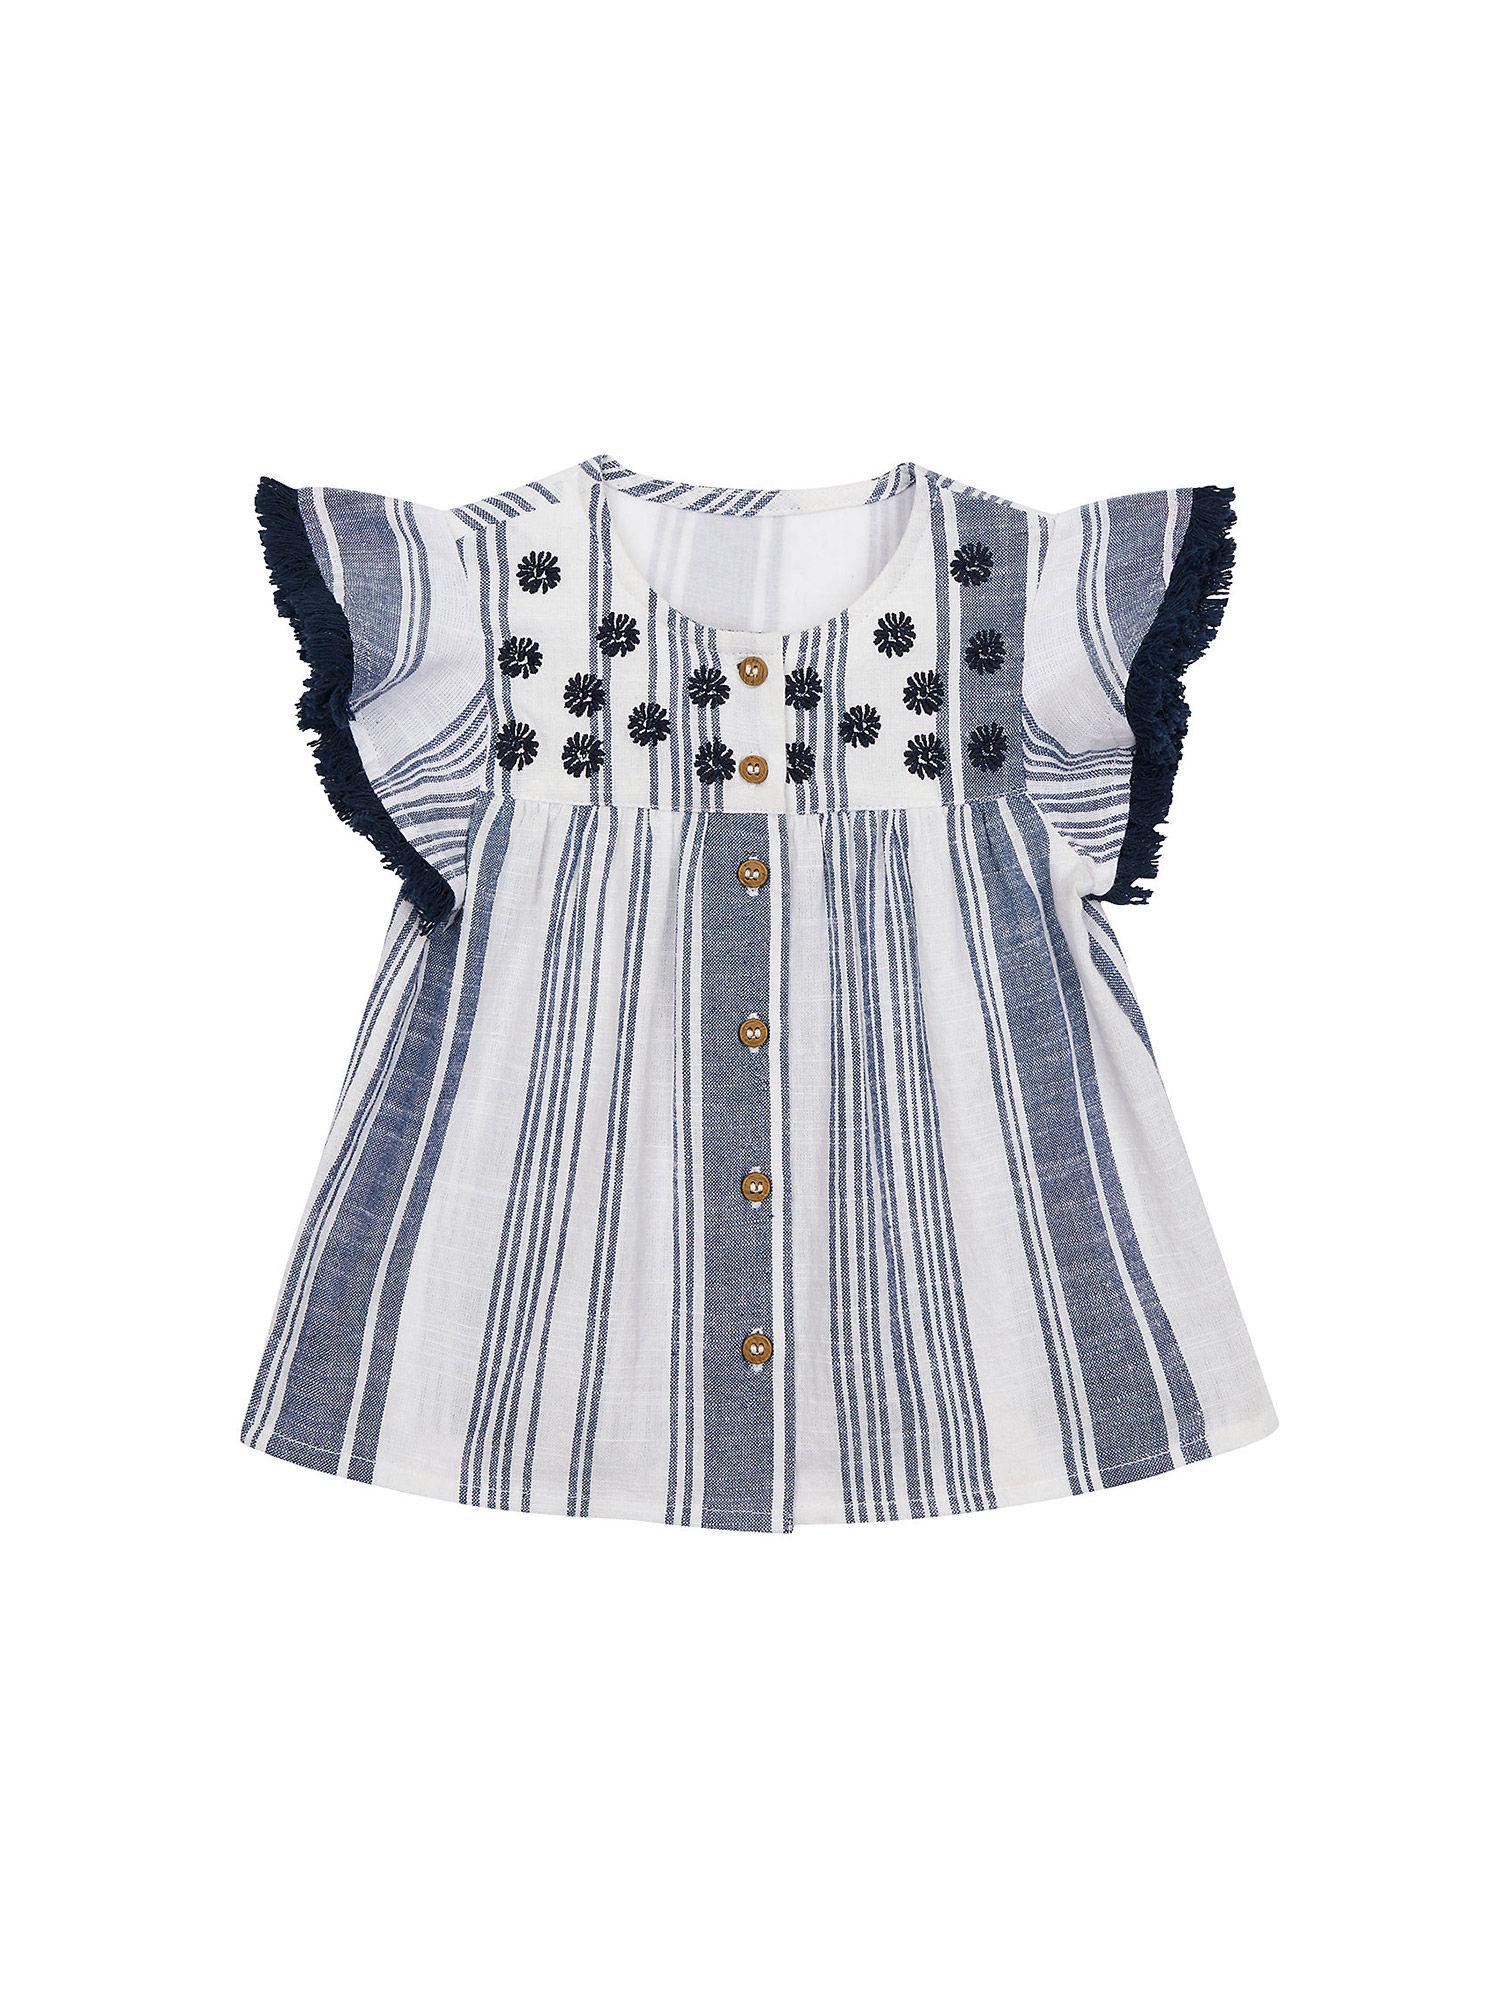 girls-half-sleeves-striped-top-embroidered